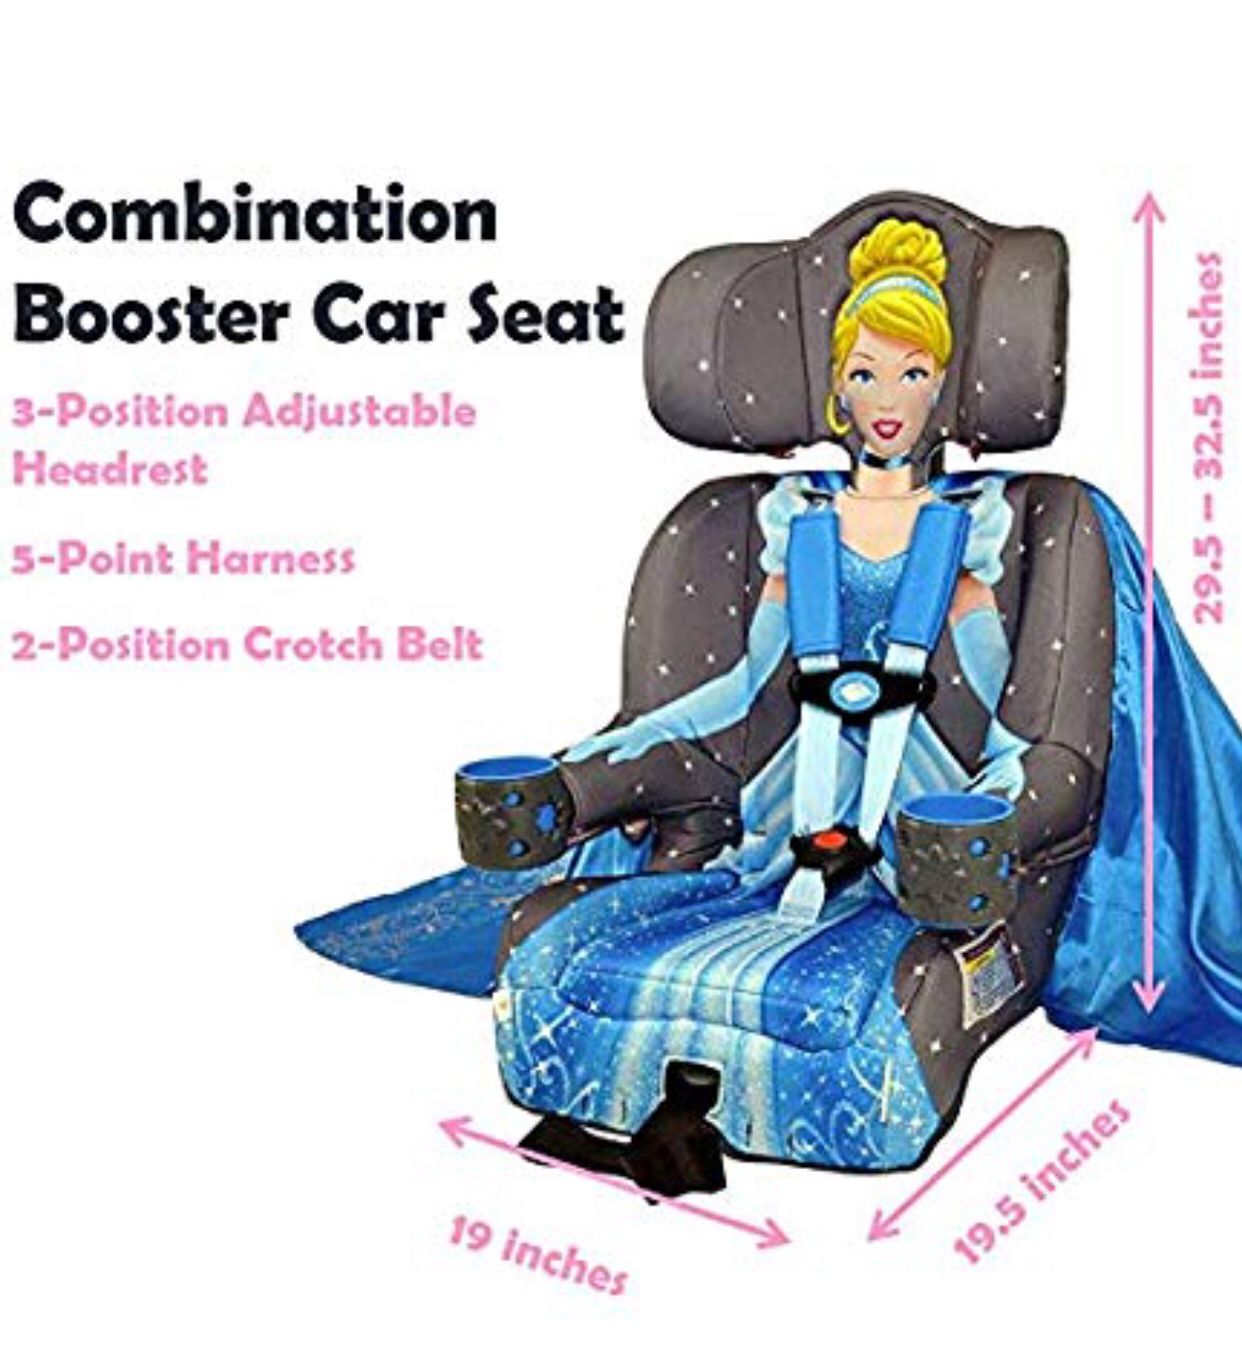 Booster Car seat, need gone